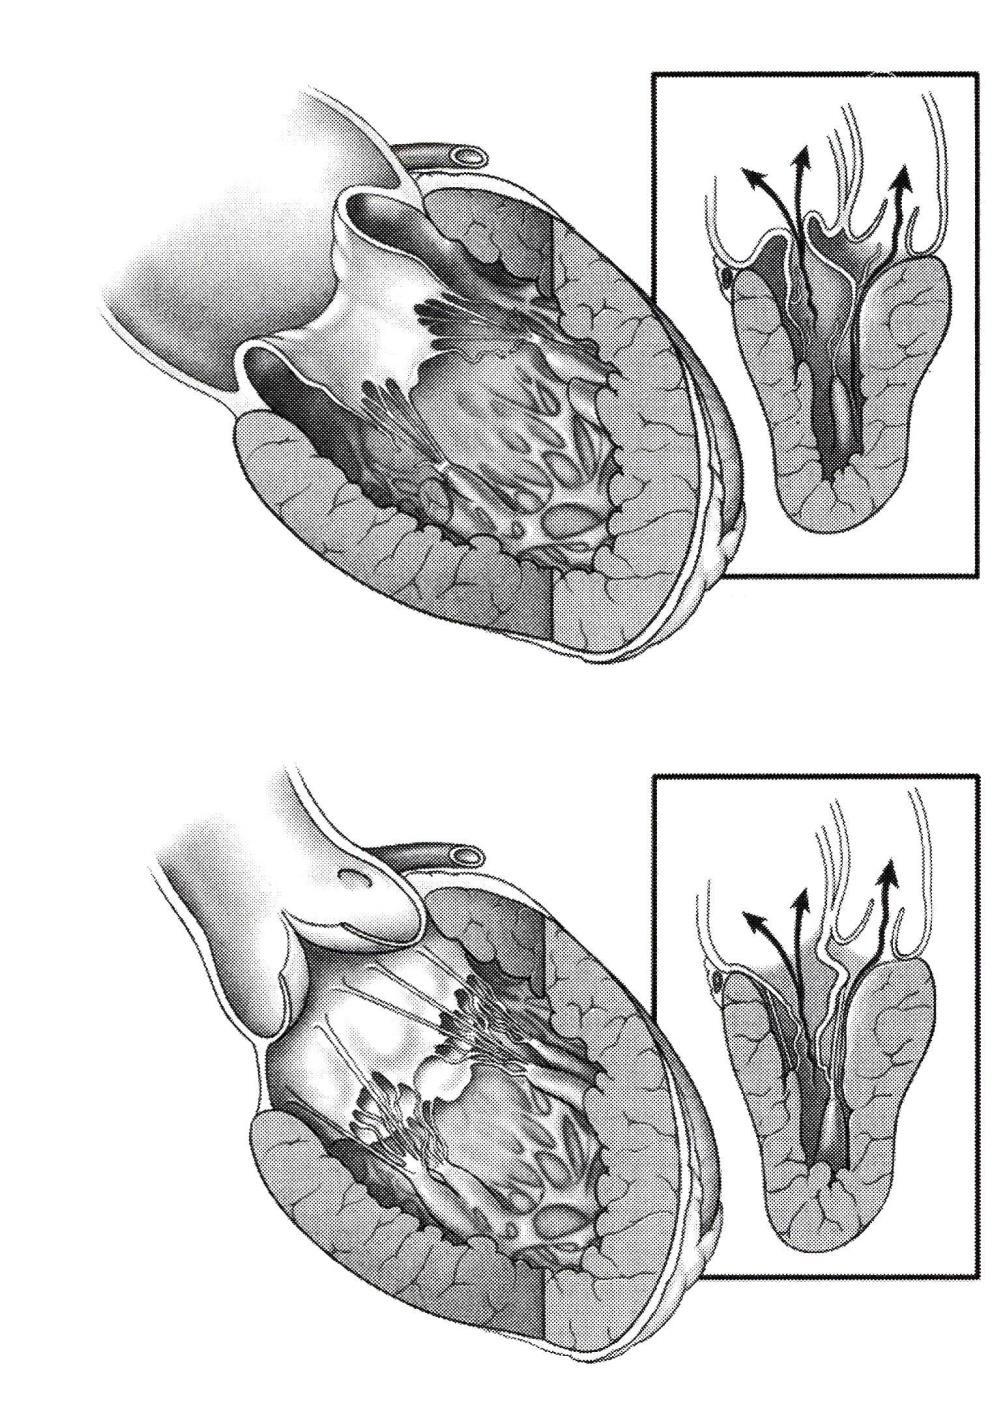 HOCM and mitral valve morphology Degenerative: thin leaflets with excessive mobility Restrictive chordae: single or multiple secondary chordae redtricting anterior leaflet